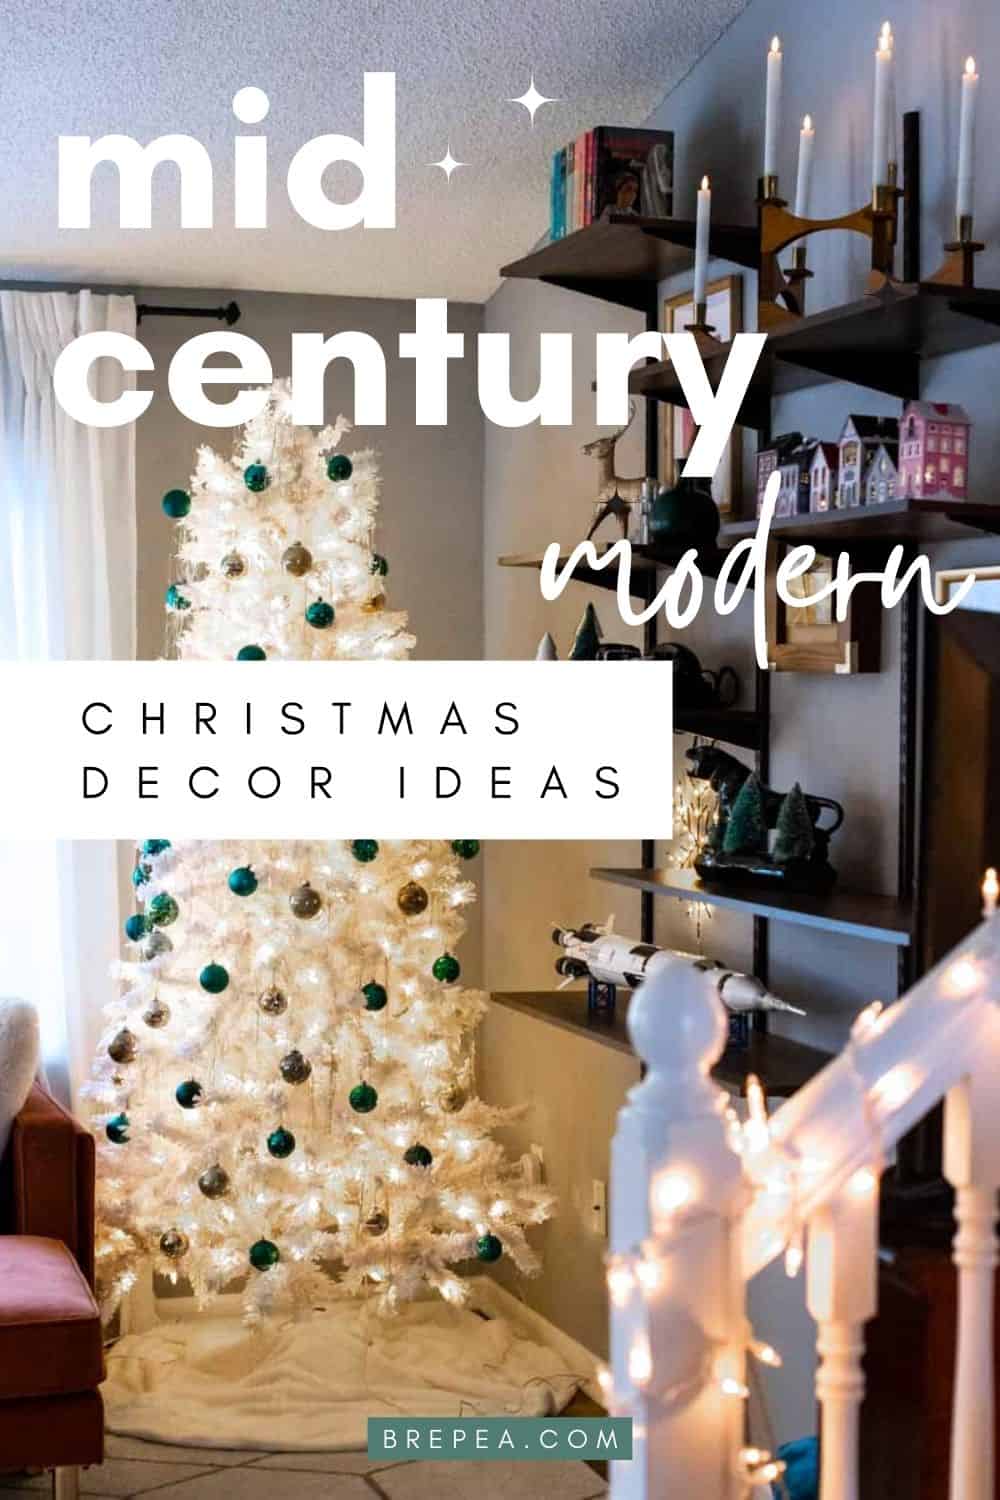 Get inspired by these festive mid century modern Christmas decor ideas on a budget!